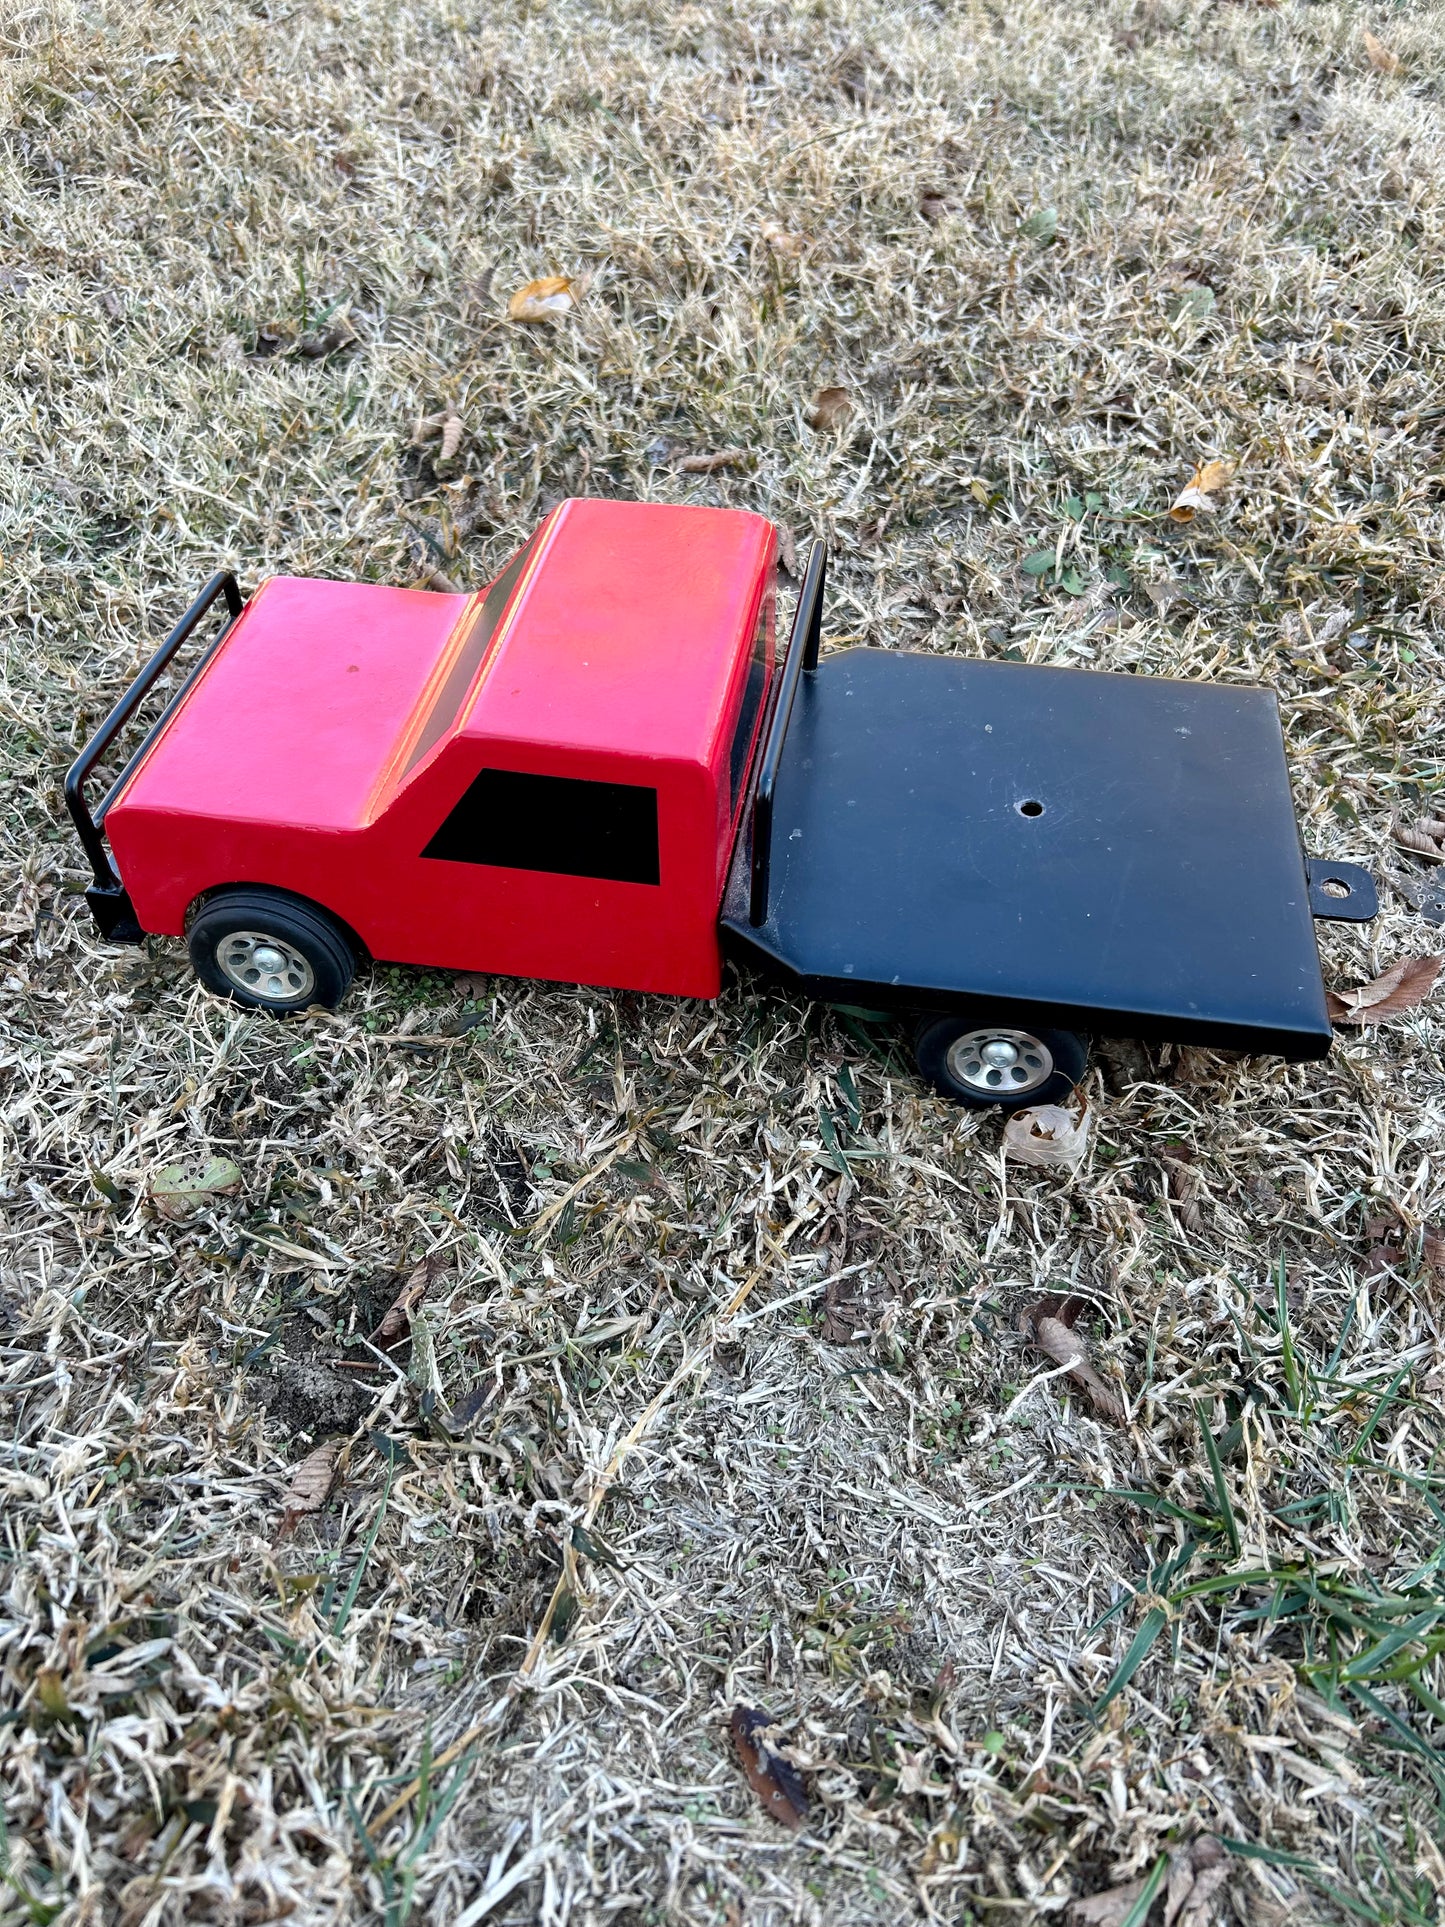 Flatbed Red Farm Truck